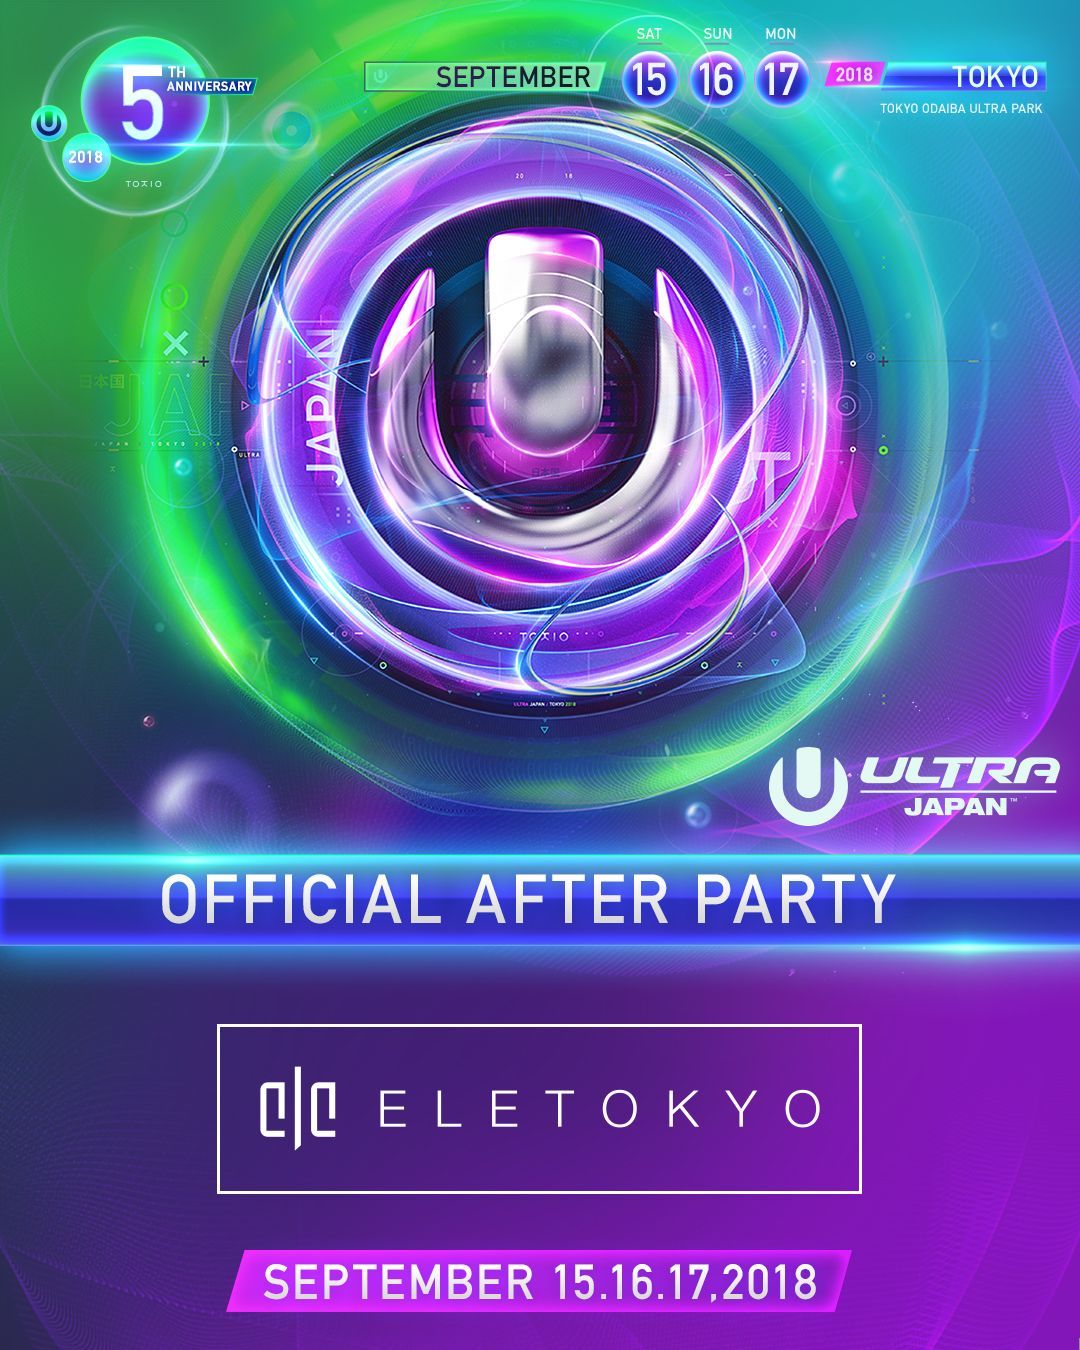 ULTRA JAPAN 2018 OFFICIAL AFTER PARTY